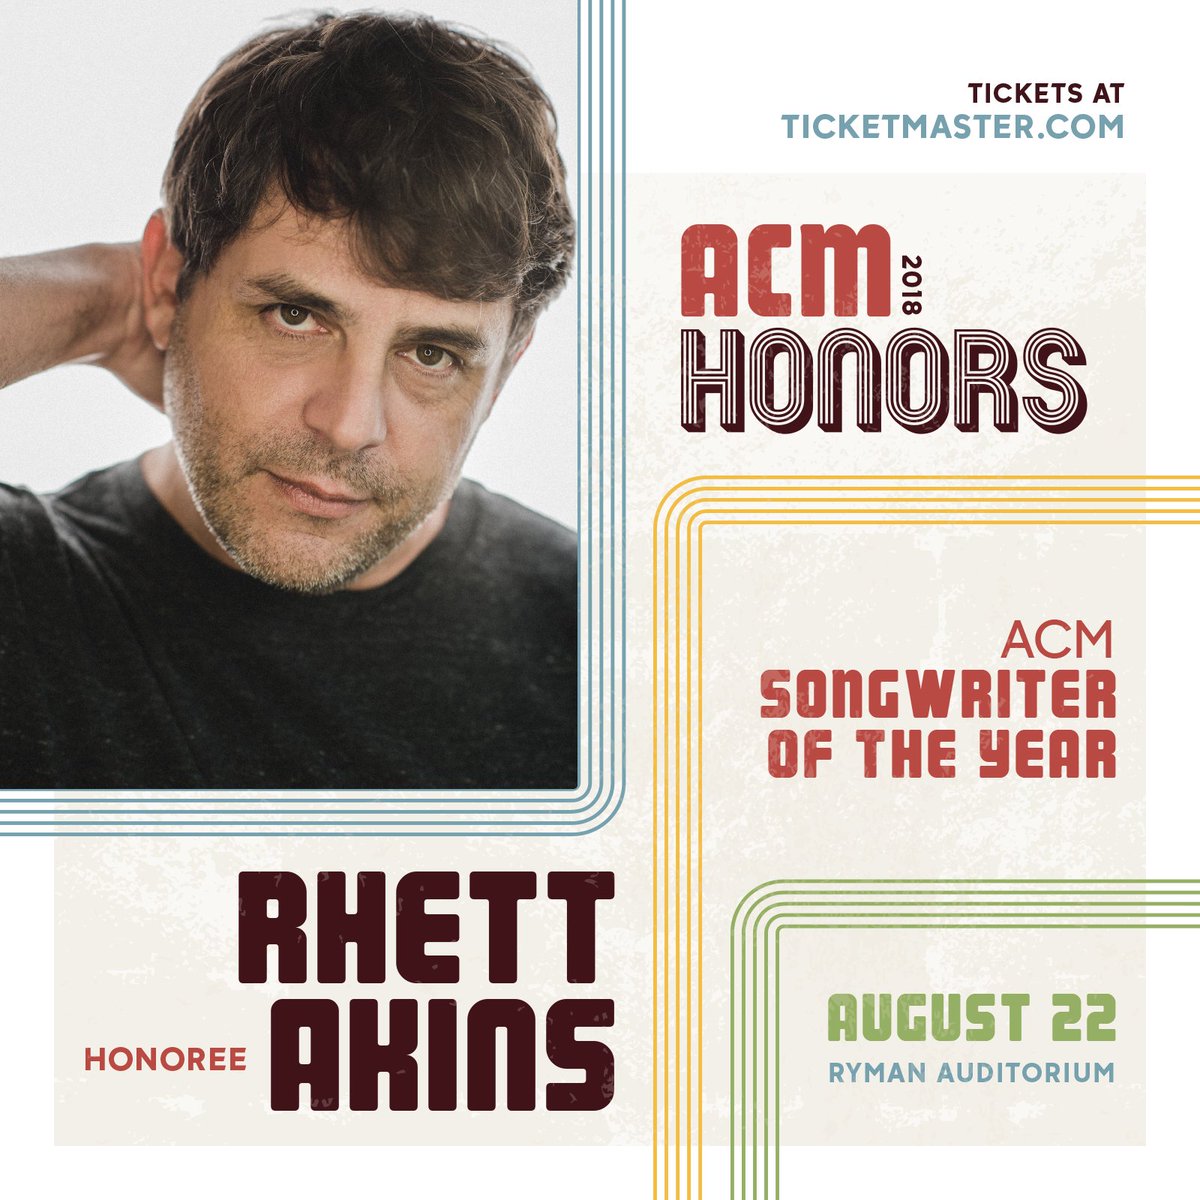 I am honored to be accepting the Songwriter of the Year Award at this year’s #ACMhonors on August 22 at @TheRyman in Nashville. Tickets for the 12th annual event are available here: bit.ly/ACMhonors18